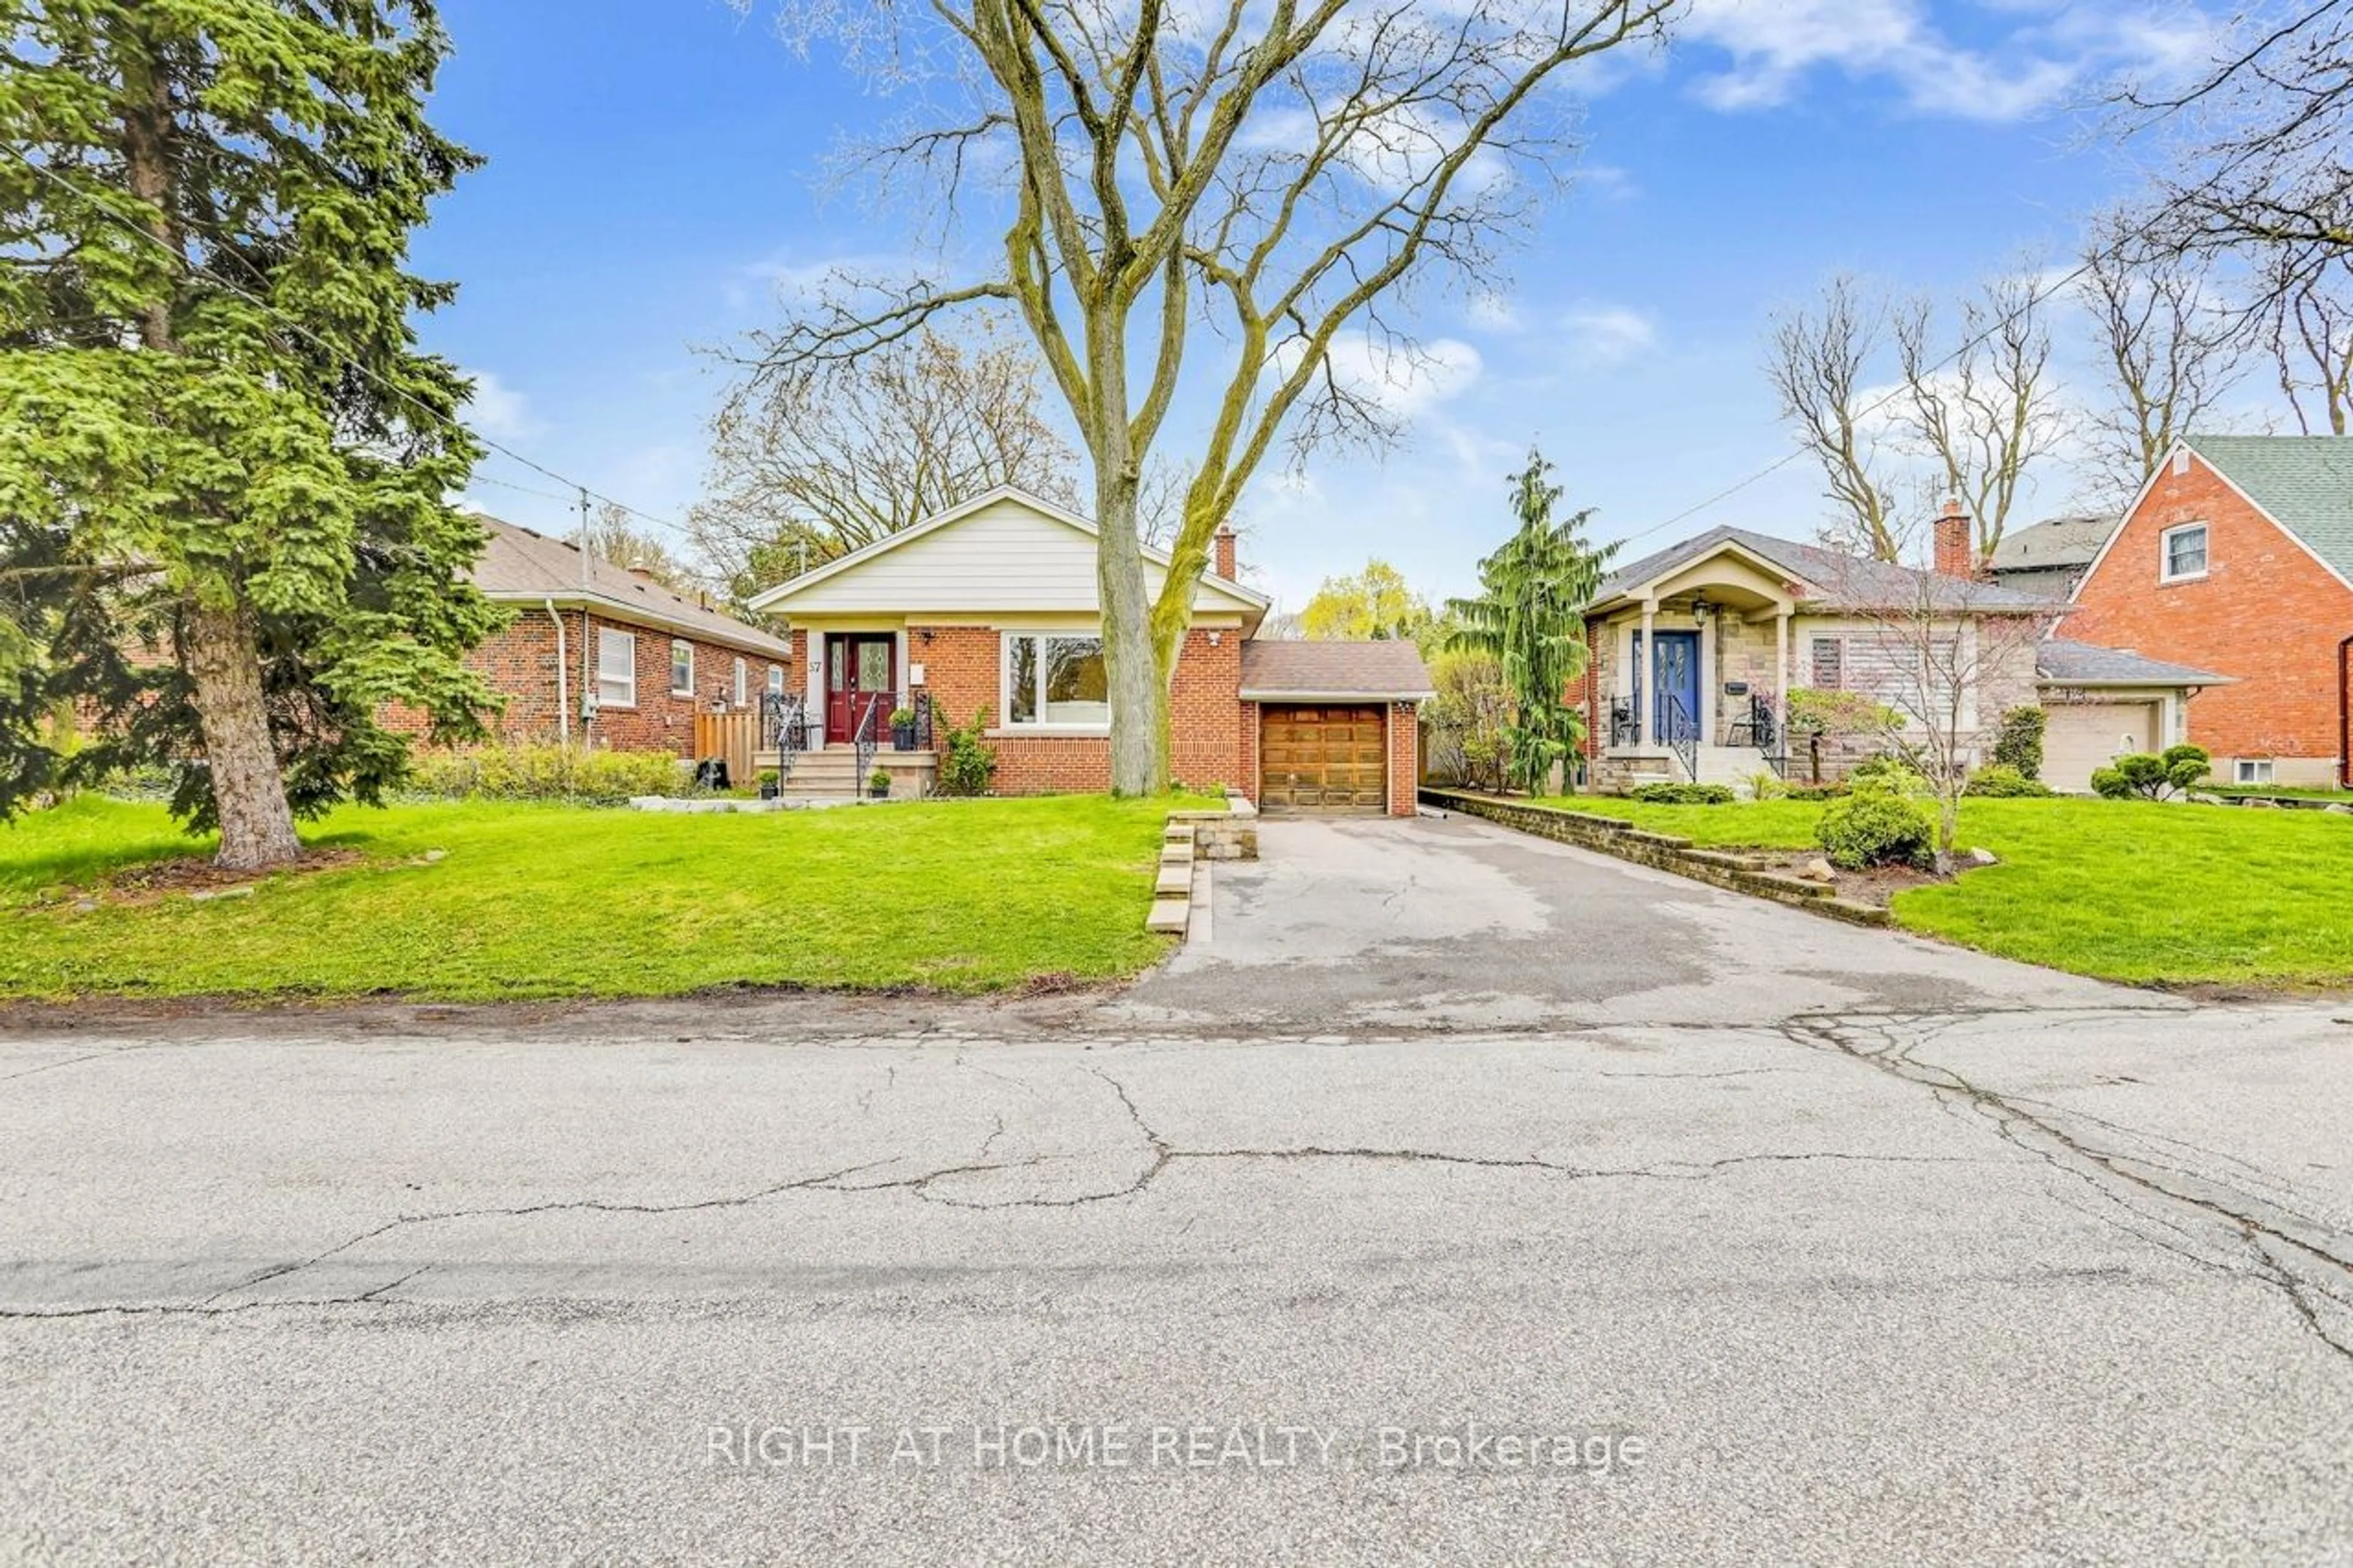 Frontside or backside of a home for 57 Beaverbrook Ave, Toronto Ontario M9B 2N5